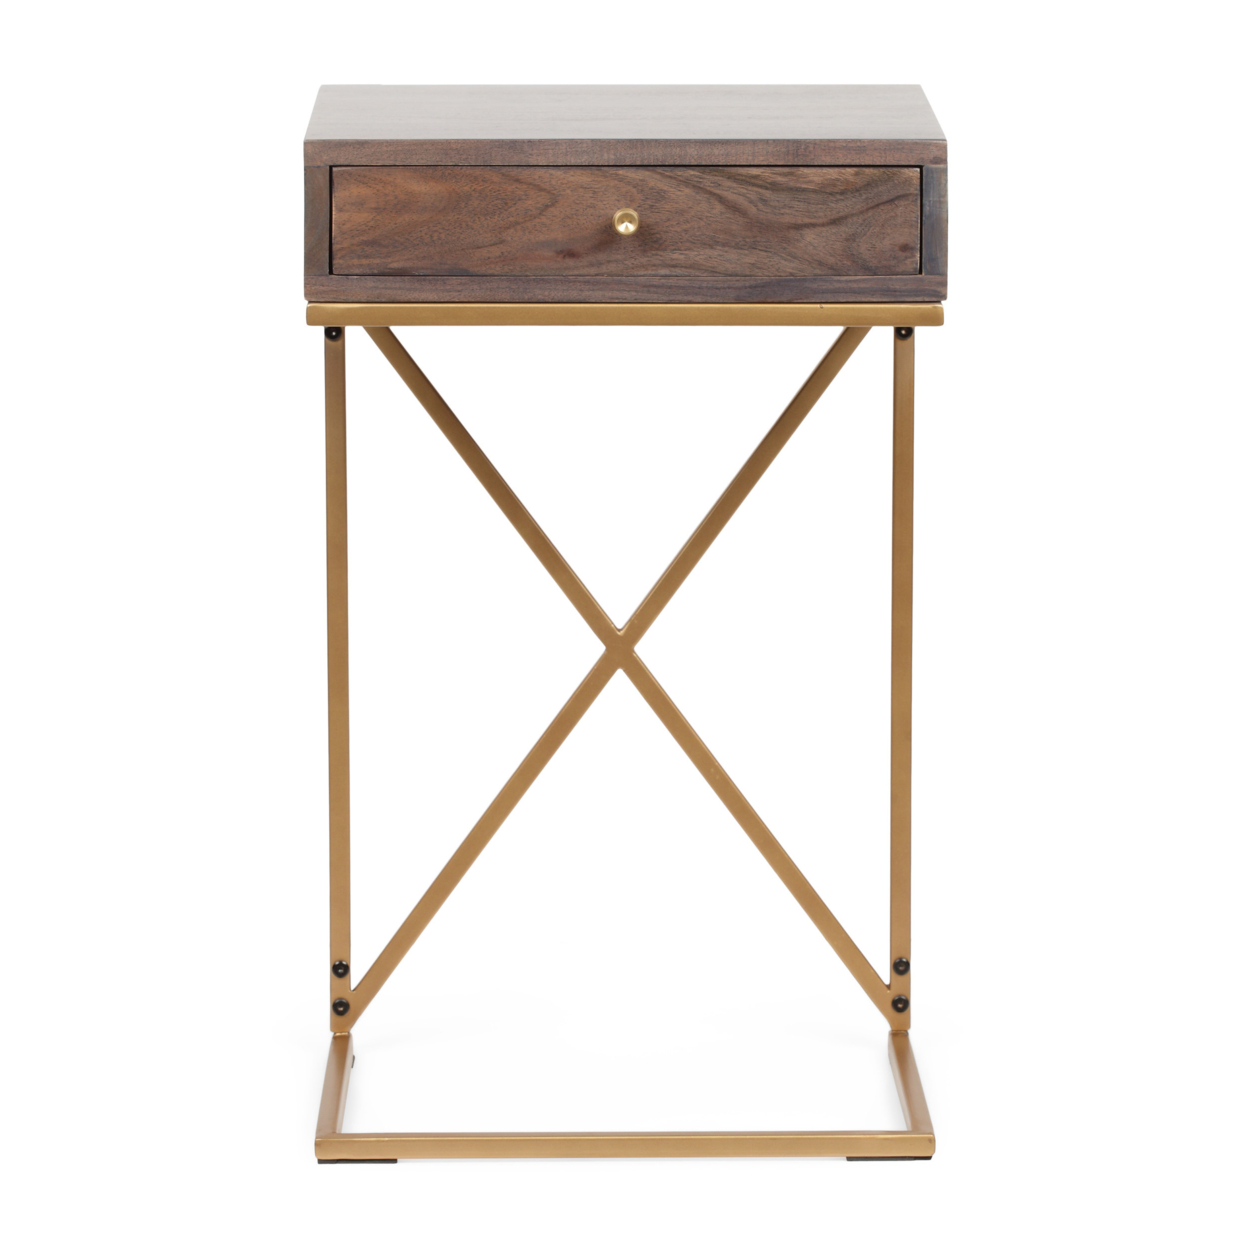 Darke Rustic Glam Handcrafted Acacia Wood C-Shaped Side Table, Dark Brown And Gold